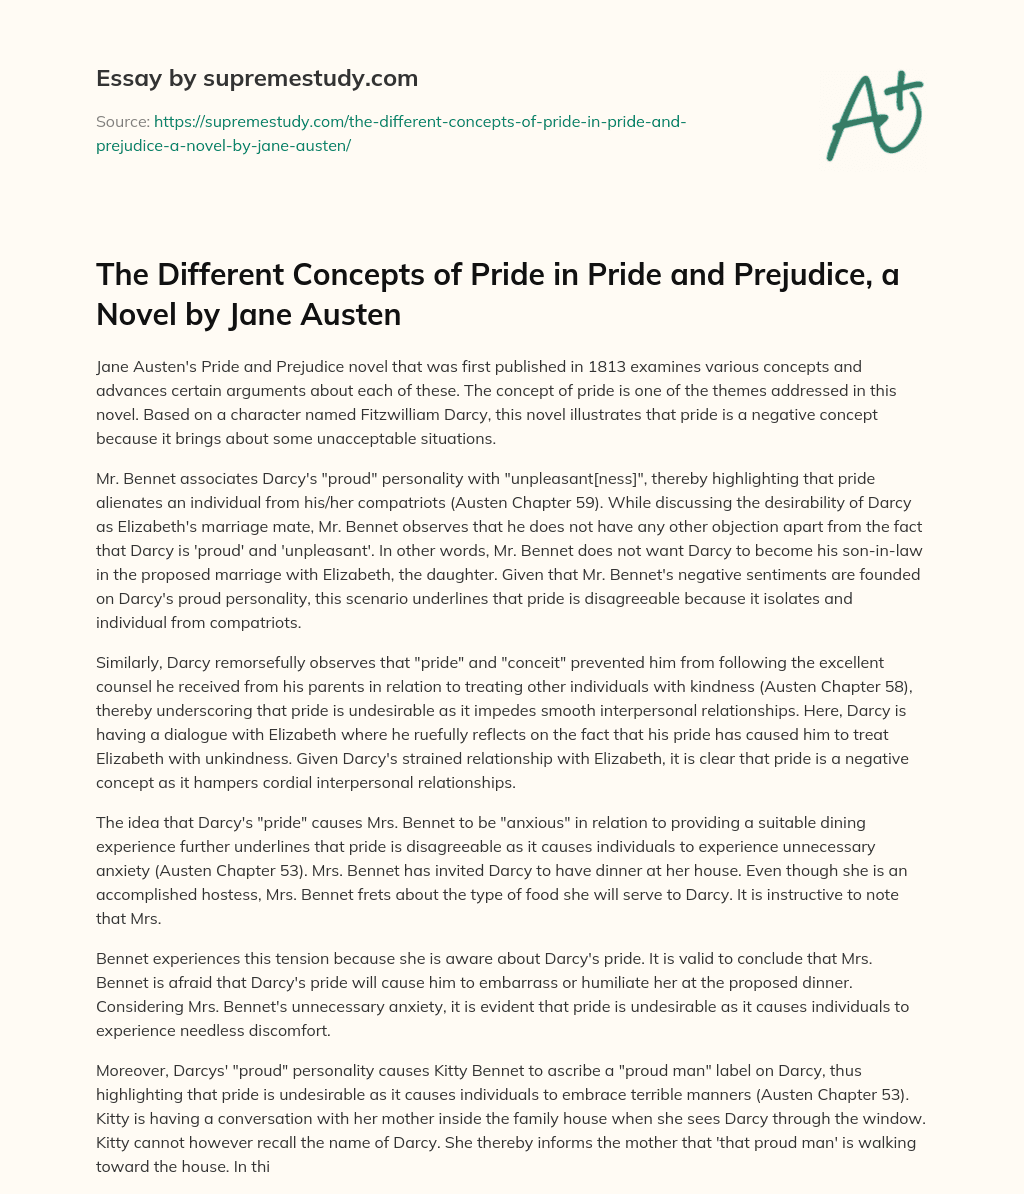 The Different Concepts of Pride in Pride and Prejudice, a Novel by Jane Austen essay